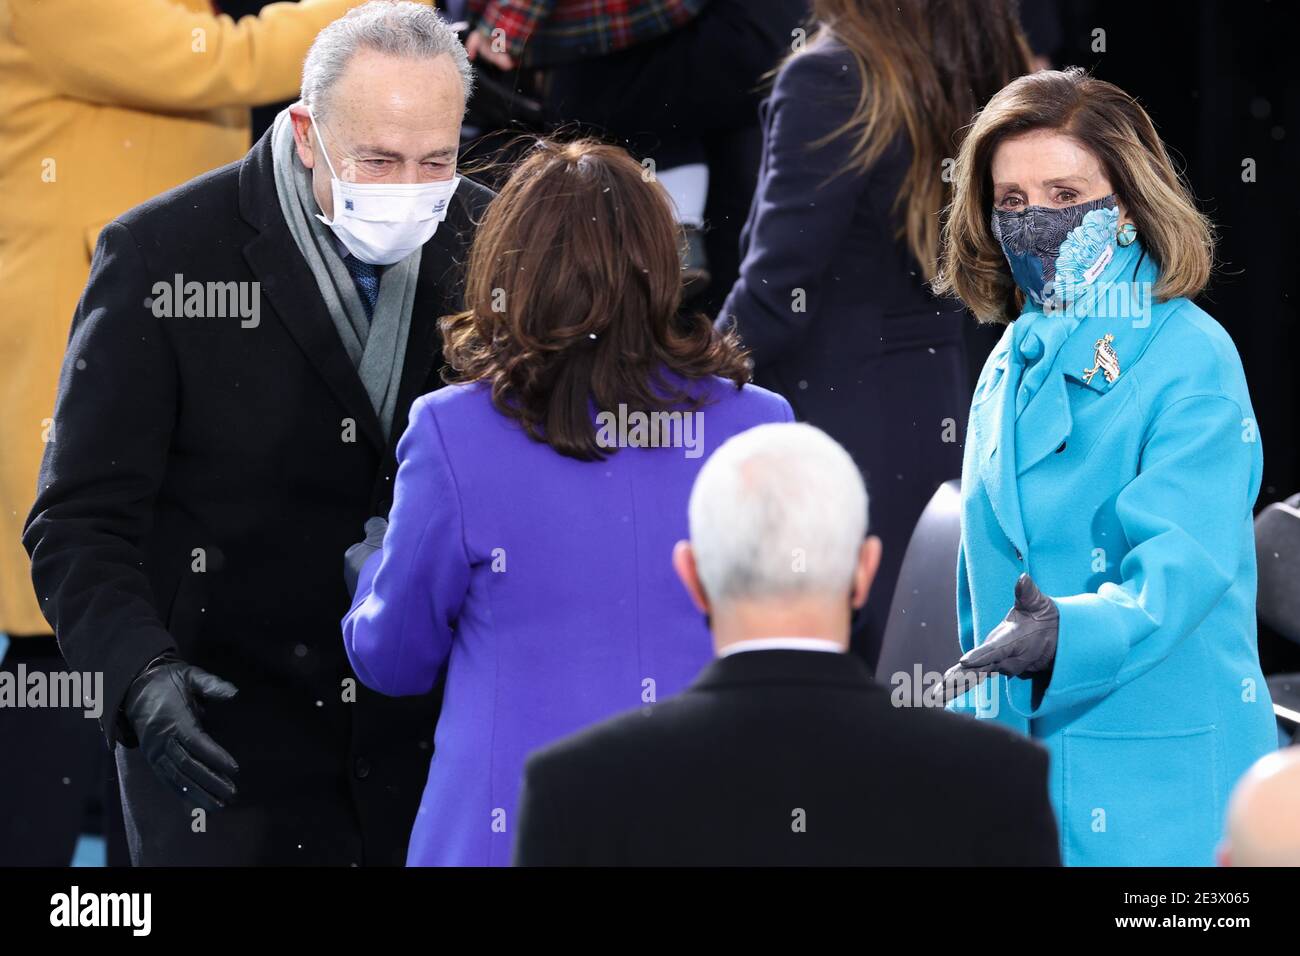 Washington, USA. 20th Jan, 2021.Chuck Schumer and Nancy Pelosi speak to Vice President-elect Kamala Harris during the Inauguration Day ceremony of President-Elect Joe Biden and Vice President-Elect Kamala Harris held at the U.S. Capitol Building in Washington, D.C. on Jan. 20, 2021. President-elect Joe Biden becomes the 46th President of the United States at noon on Inauguration Day. (Photo by Oliver Contreras/Sipa USA) Stock Photo